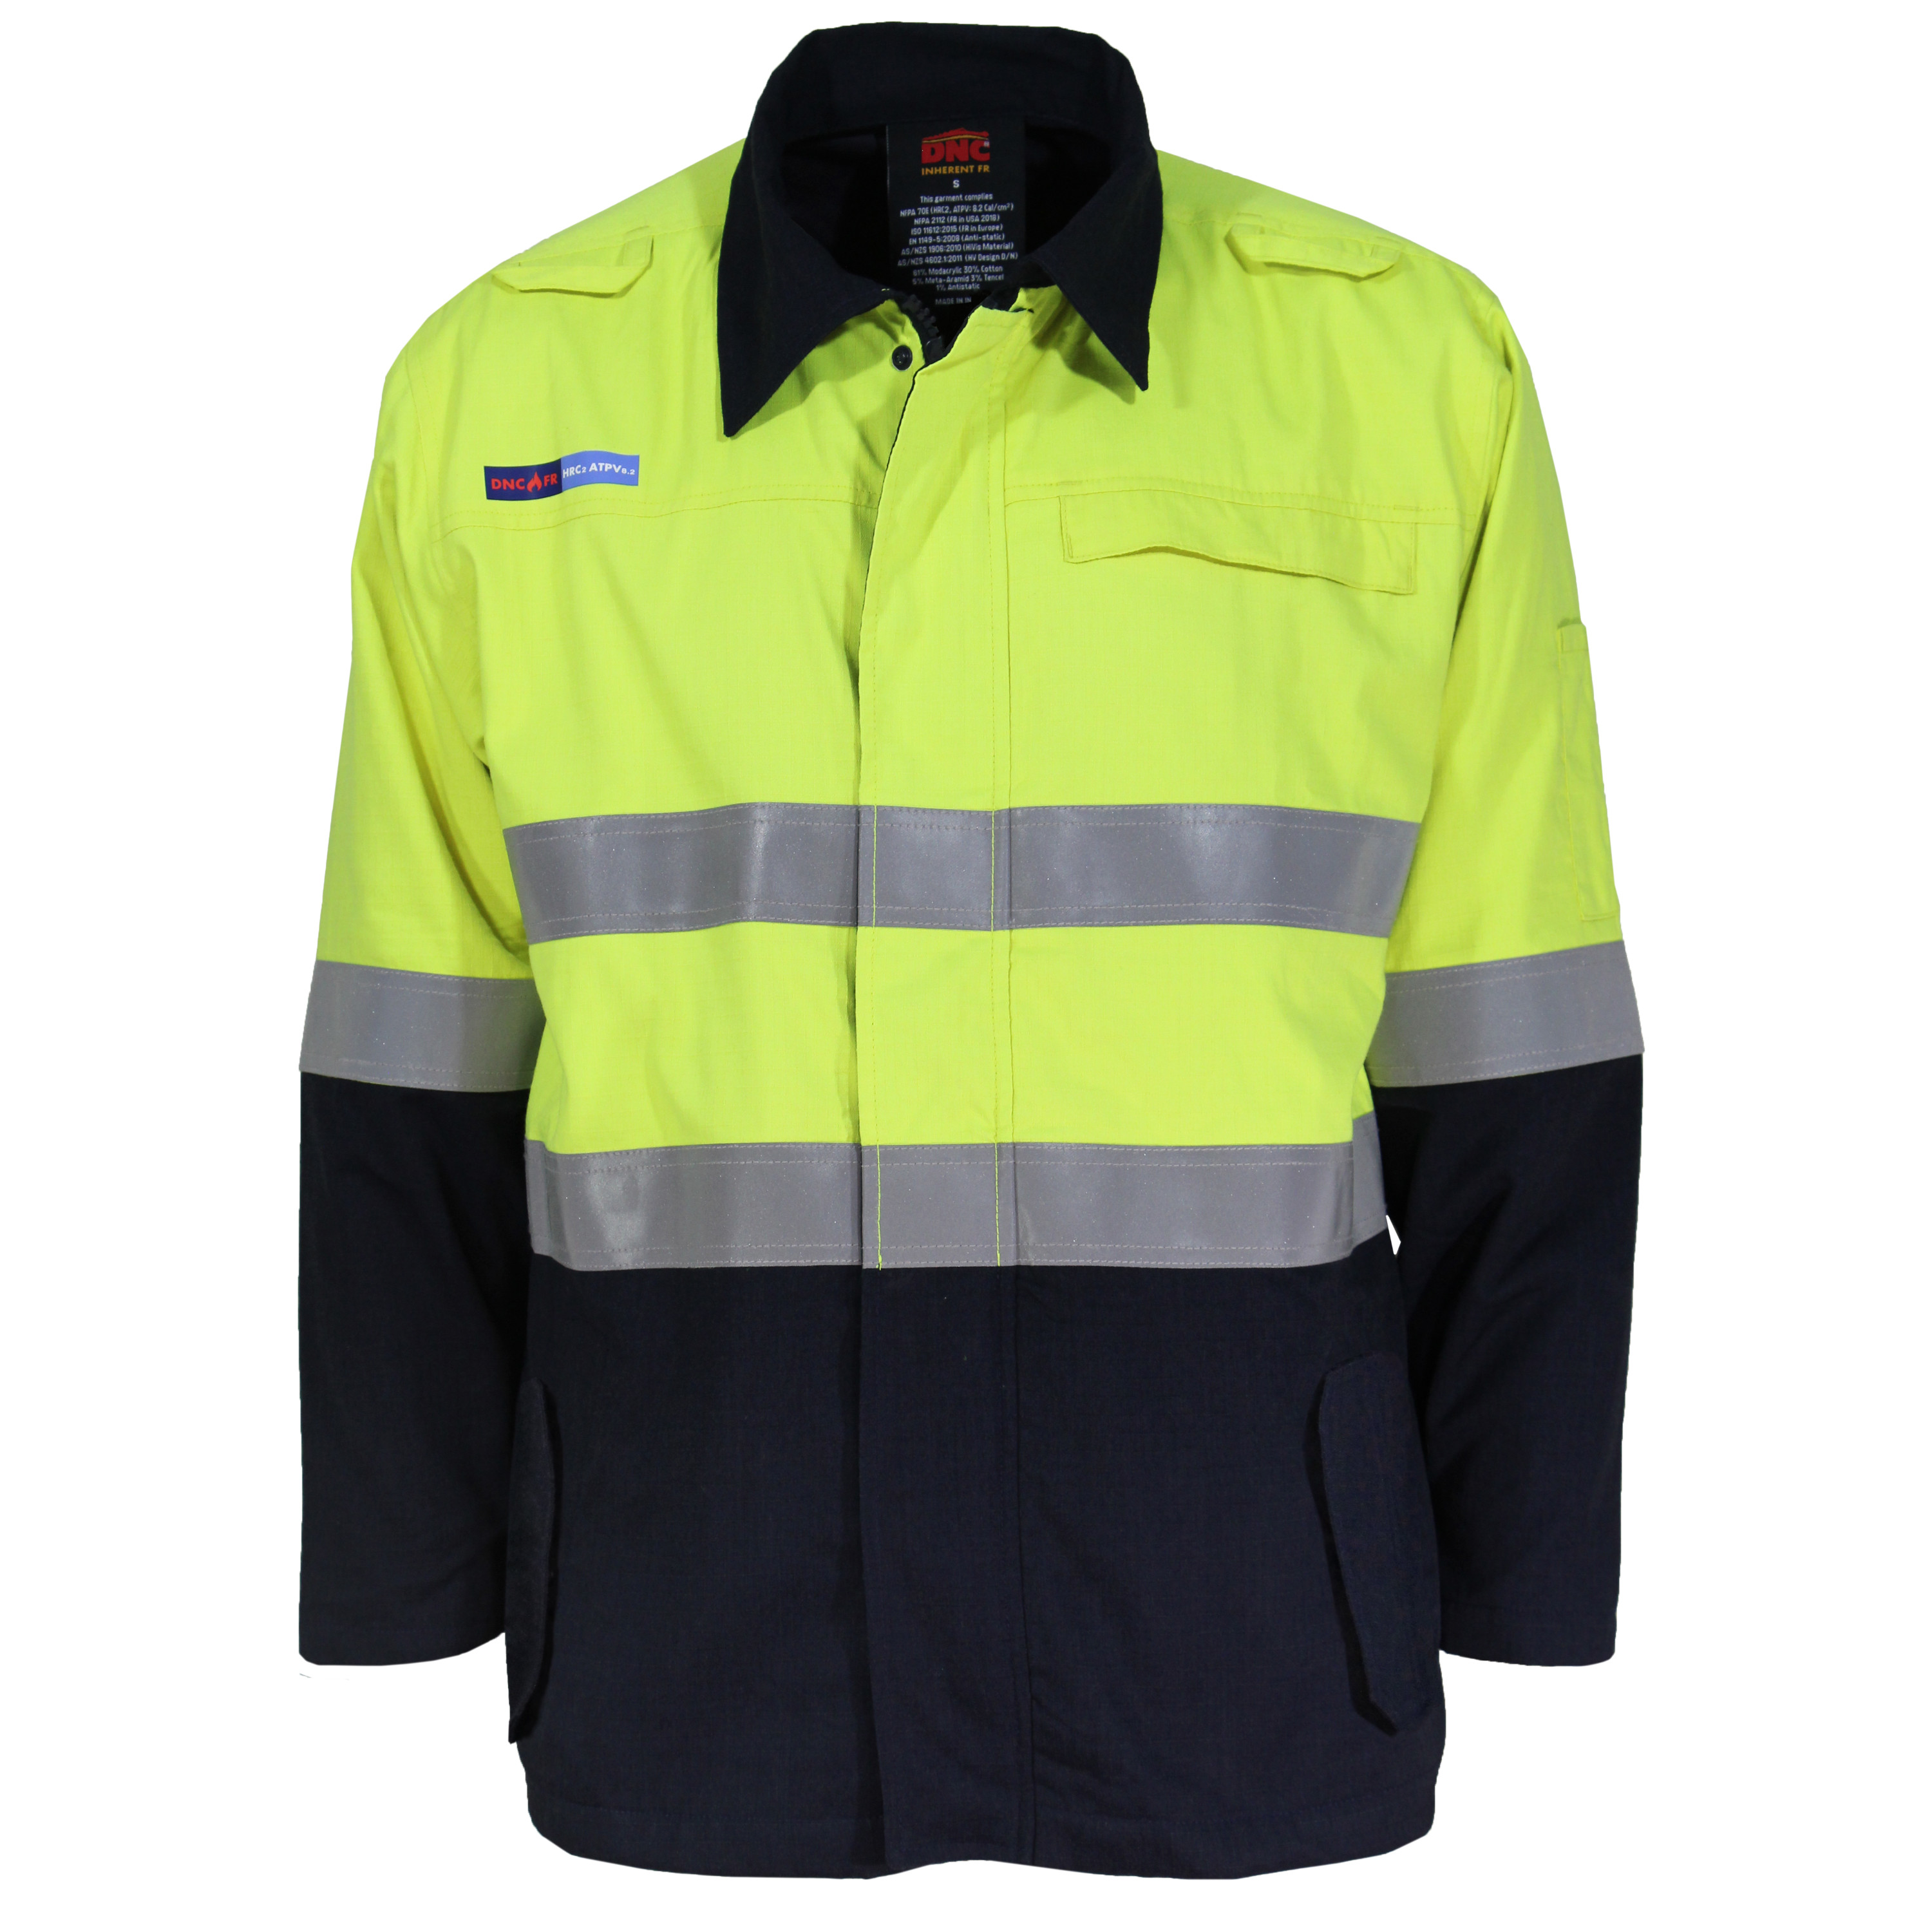 JACKET INHERENT FR PPE2 Y/N XL ATPV8 230gsm RIPSTOP TAPED